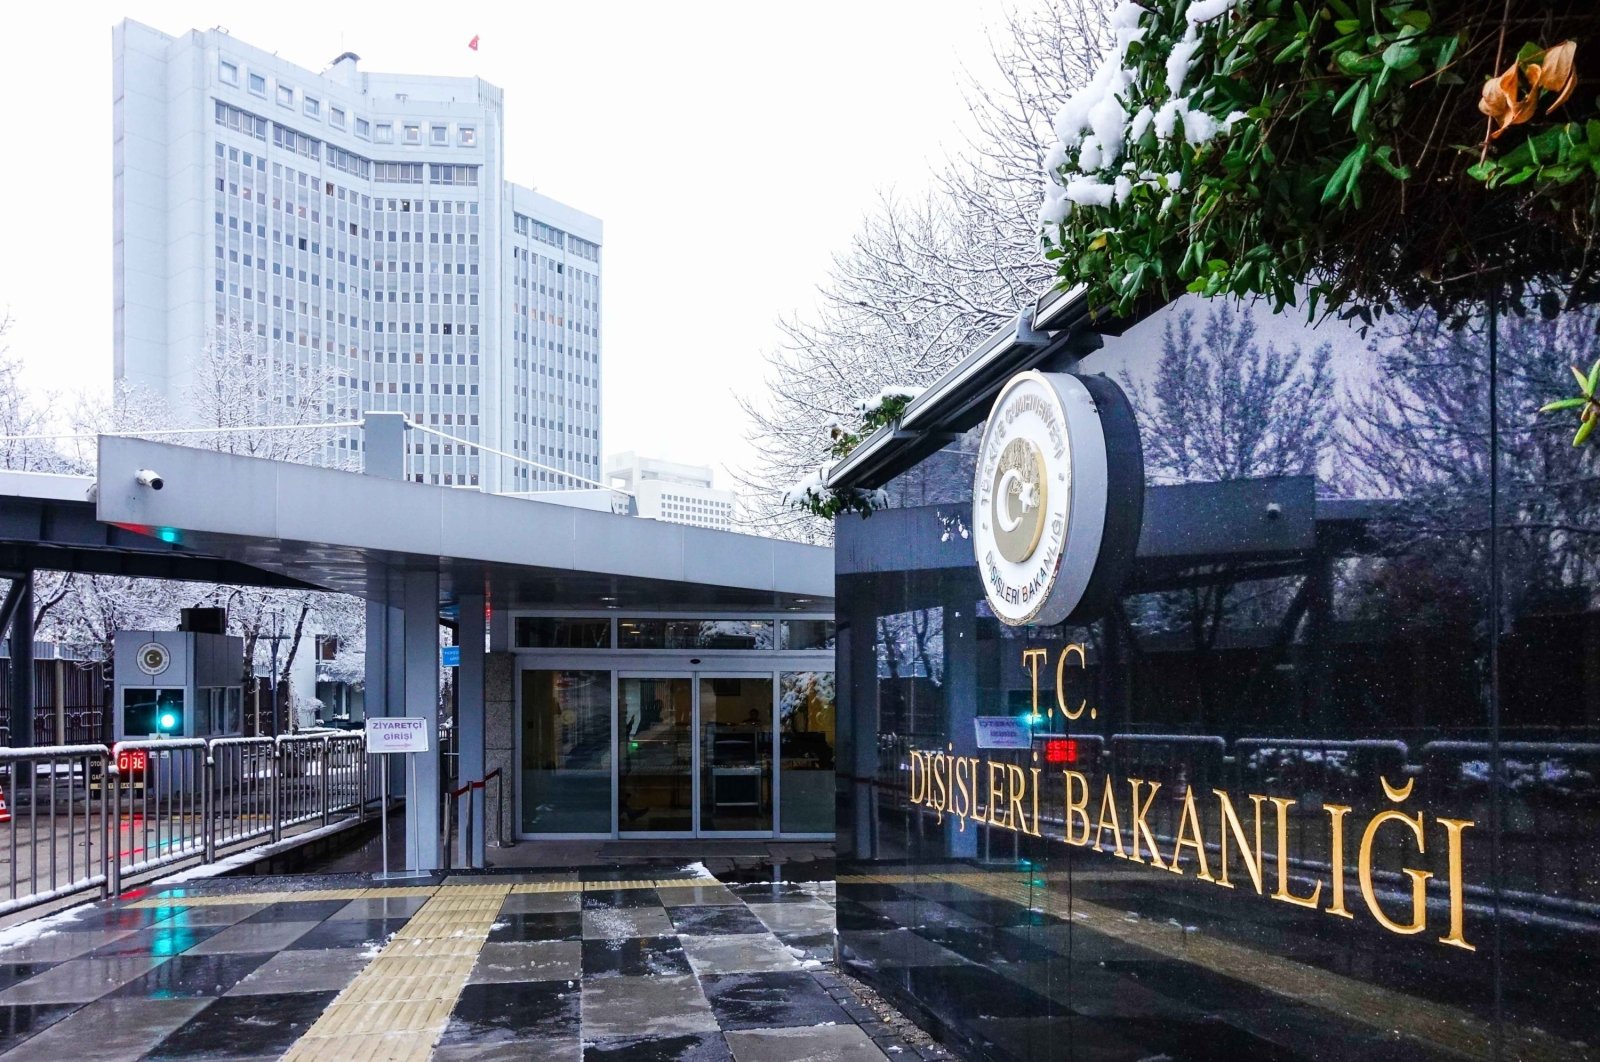 Ministry of Foreign Affairs headquarters in Turkey's capital Ankara in this undated file photo. (File Photo)